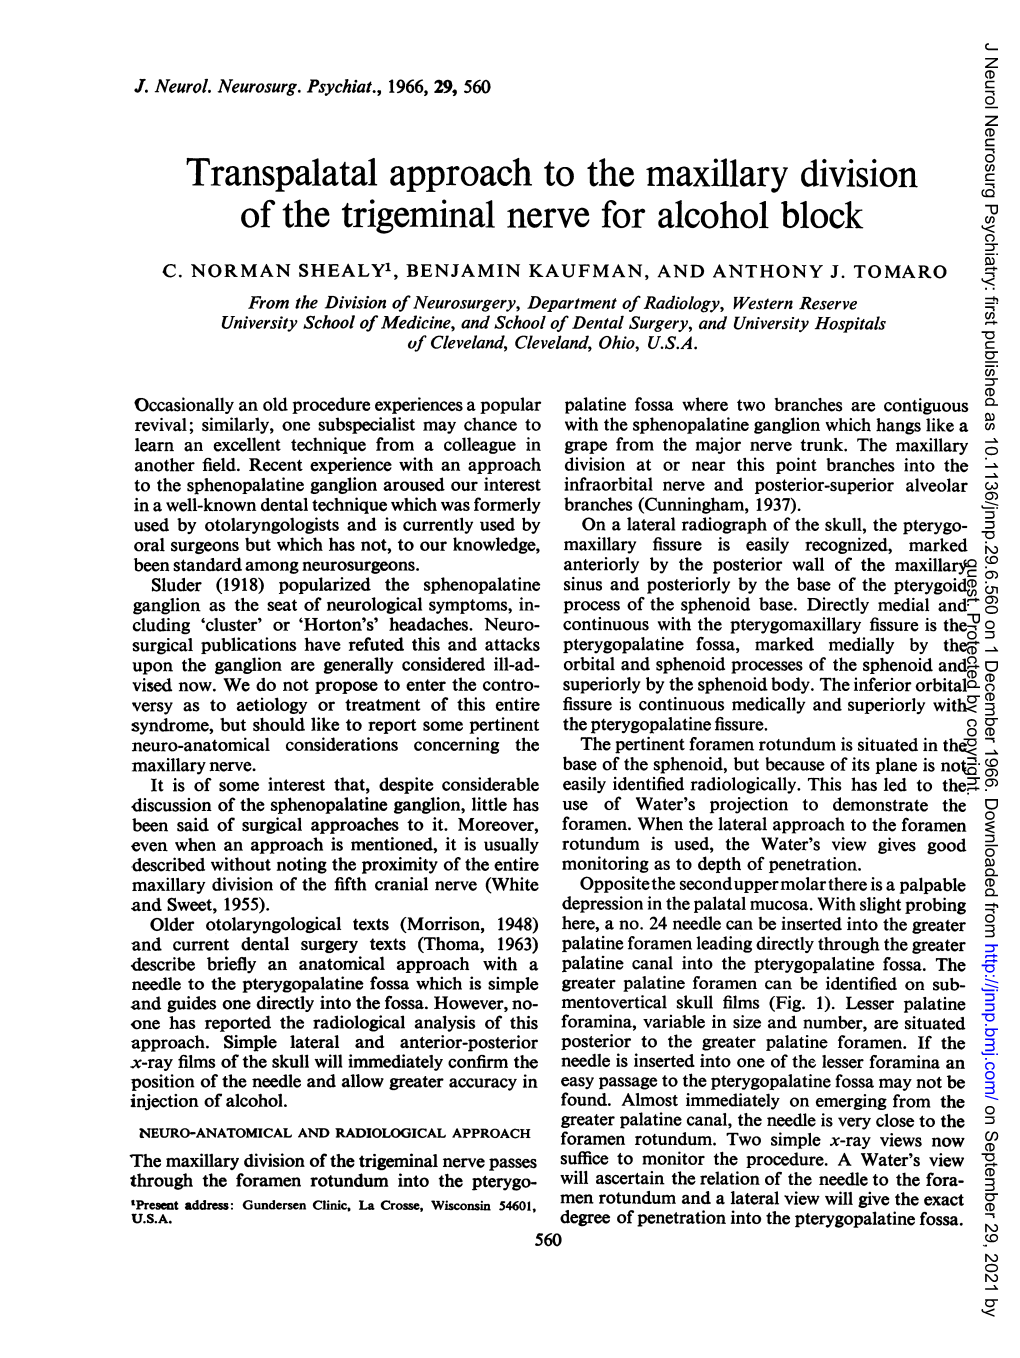 Transpalatal Approach to the Maxillary Division of the Trigeminal Nerve for Alcohol Block